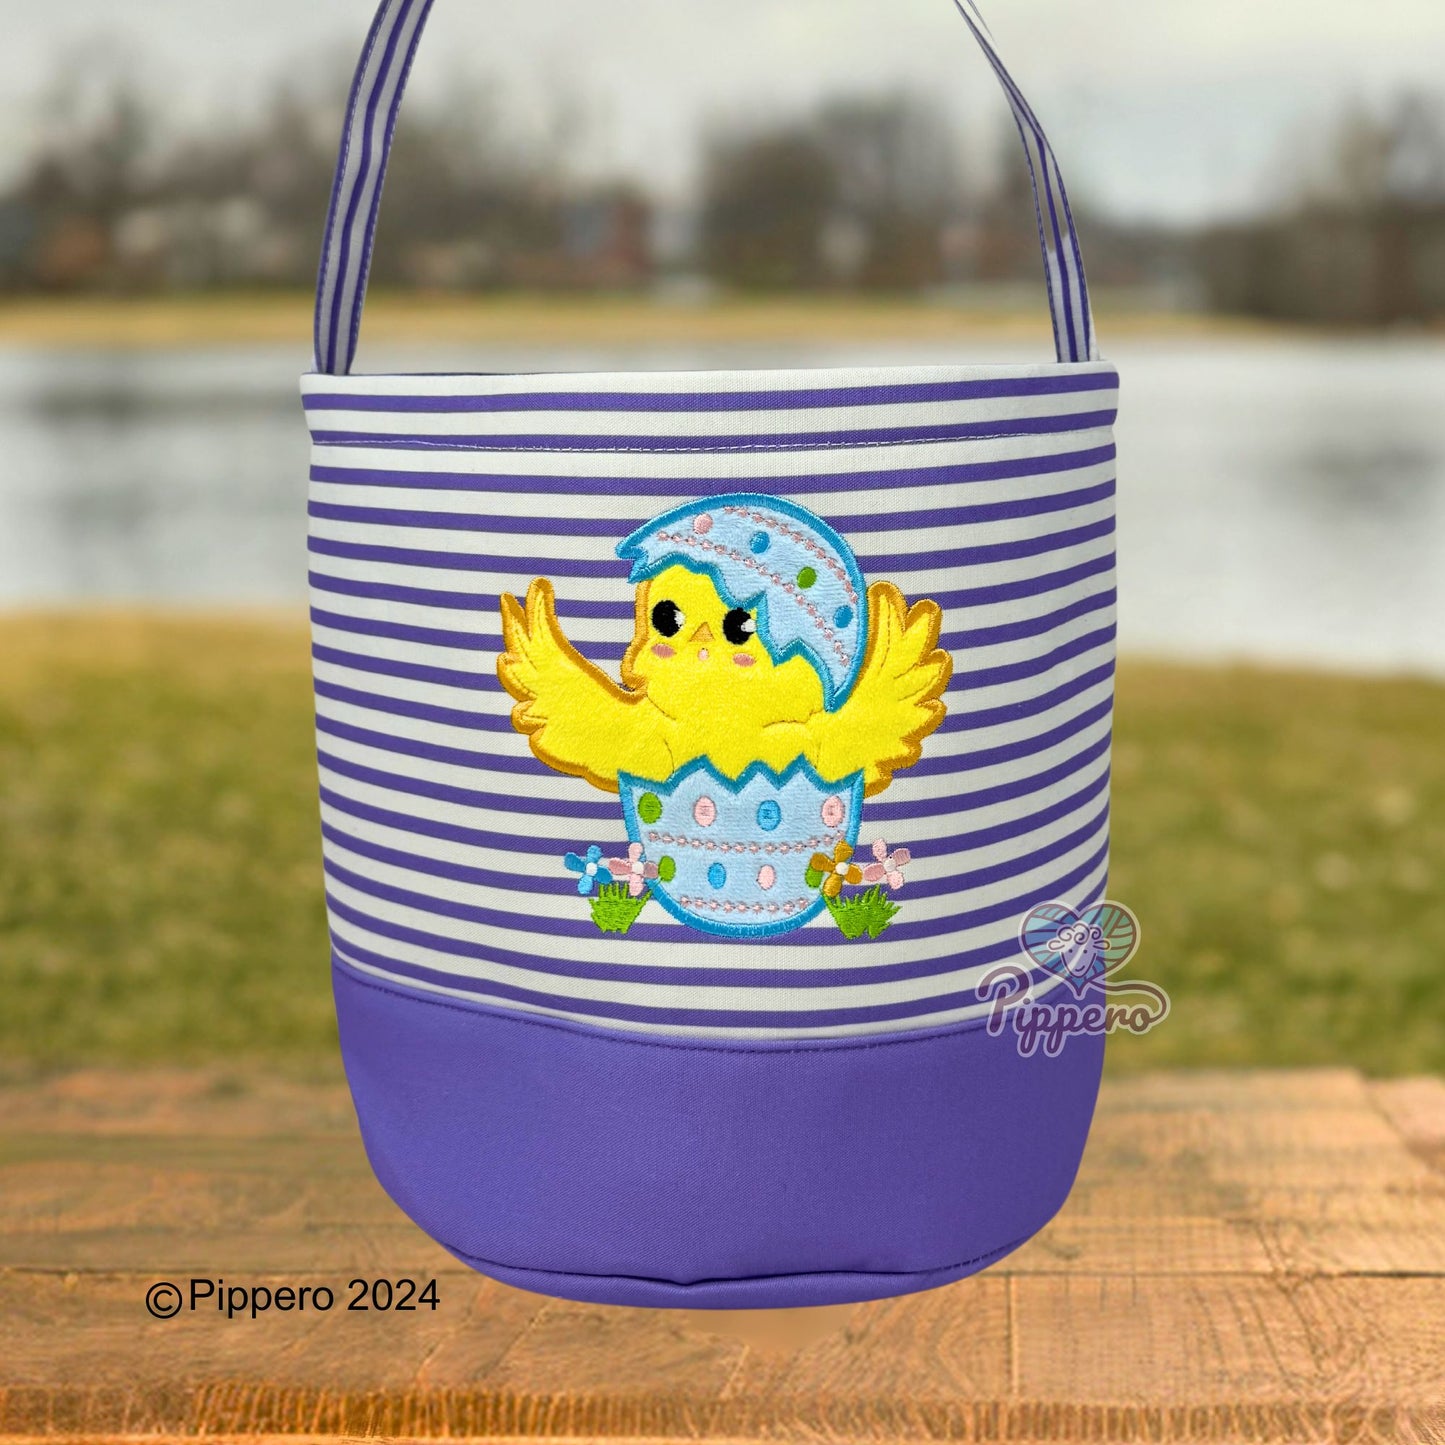 Easter Basket Bucket with Adorable Custom Pippero Design Bunny Cross Lamb Chick Egg Appliqué Characters Gift for Boy Gift for Girl